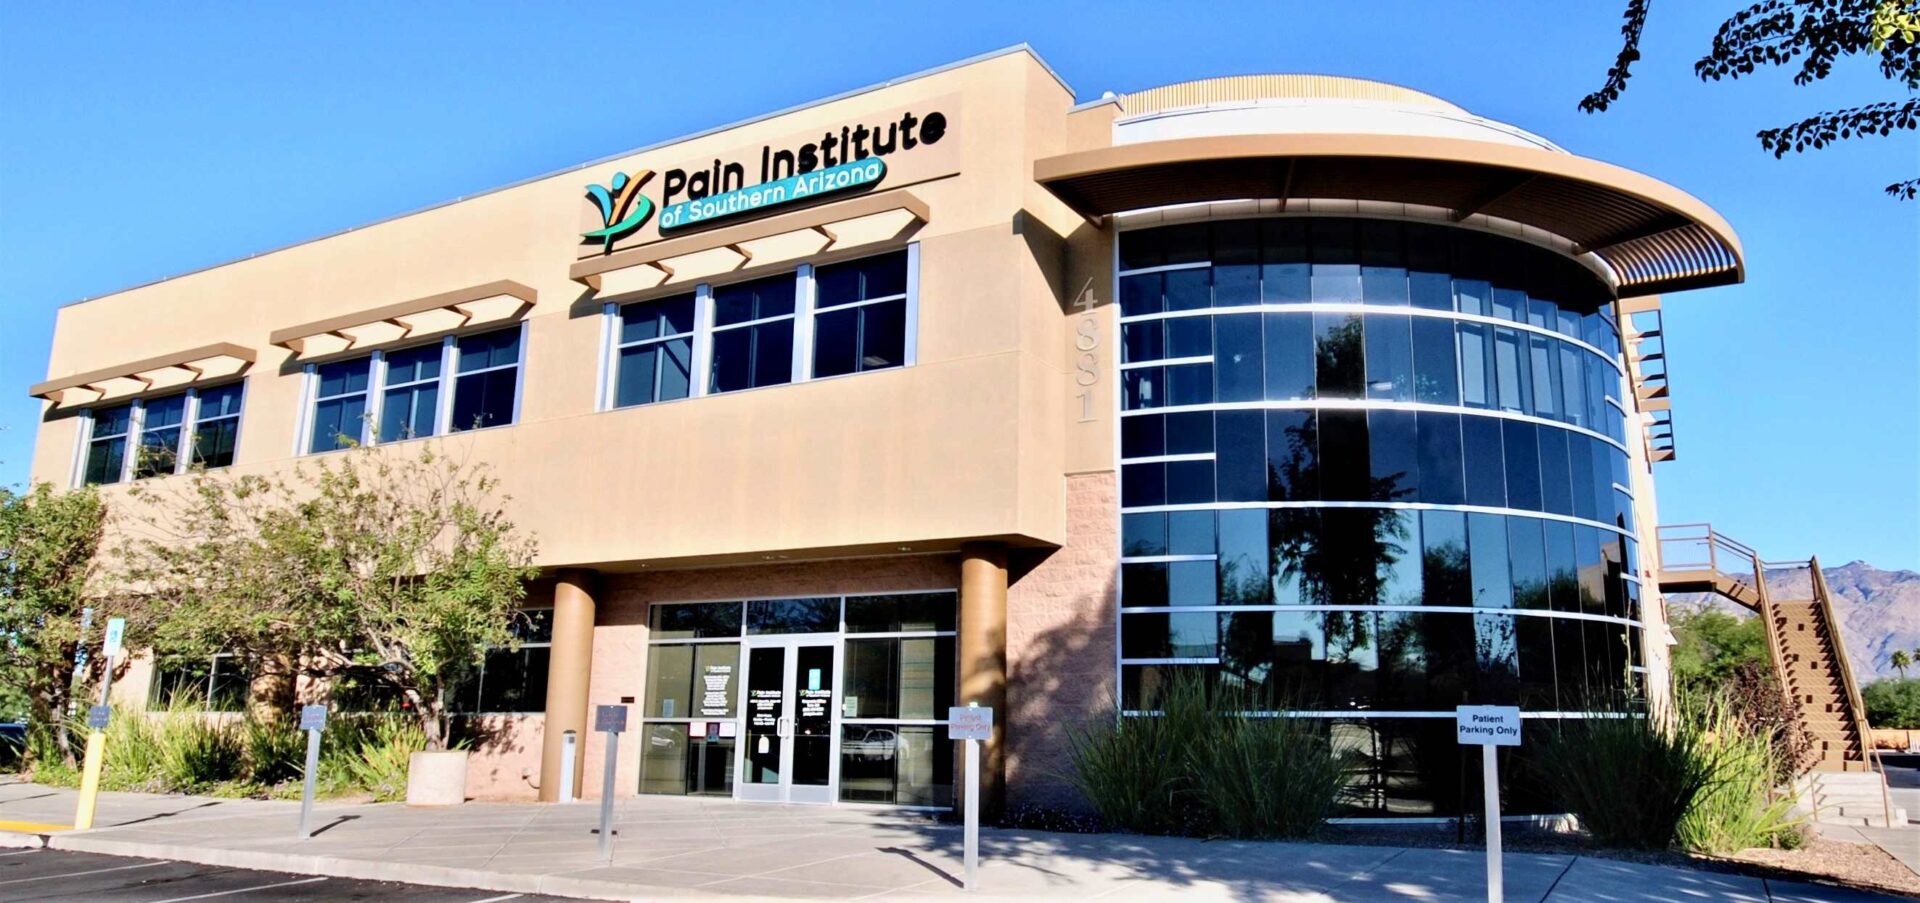 Outside view of a medical pain institute with mirror glasses